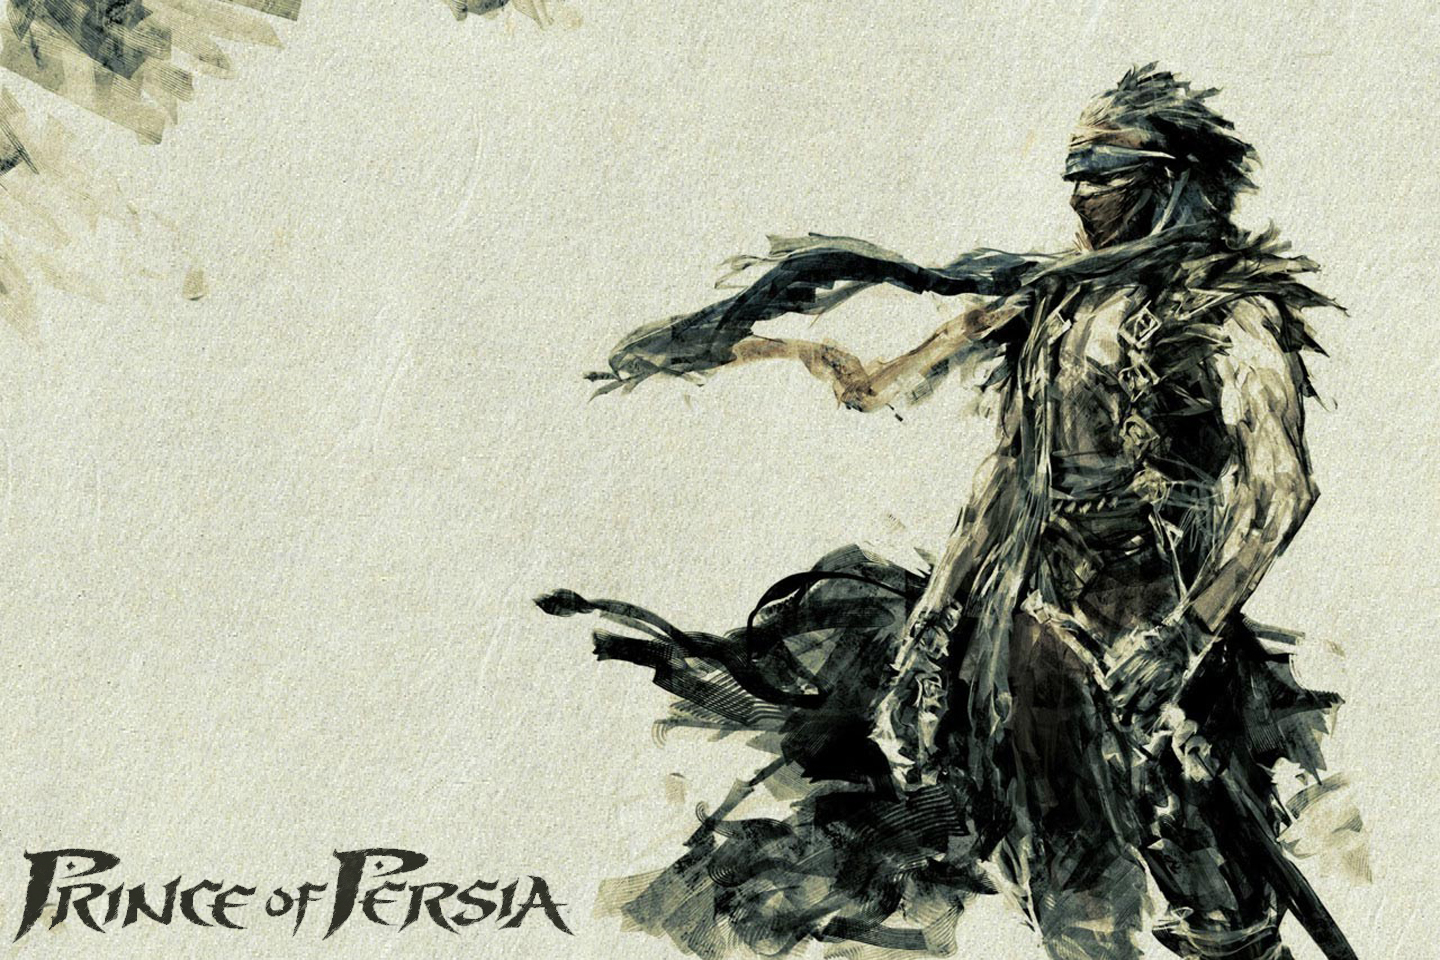 Prince Of Persia 2008 Video Games Artwork 2008 Year 1440x960